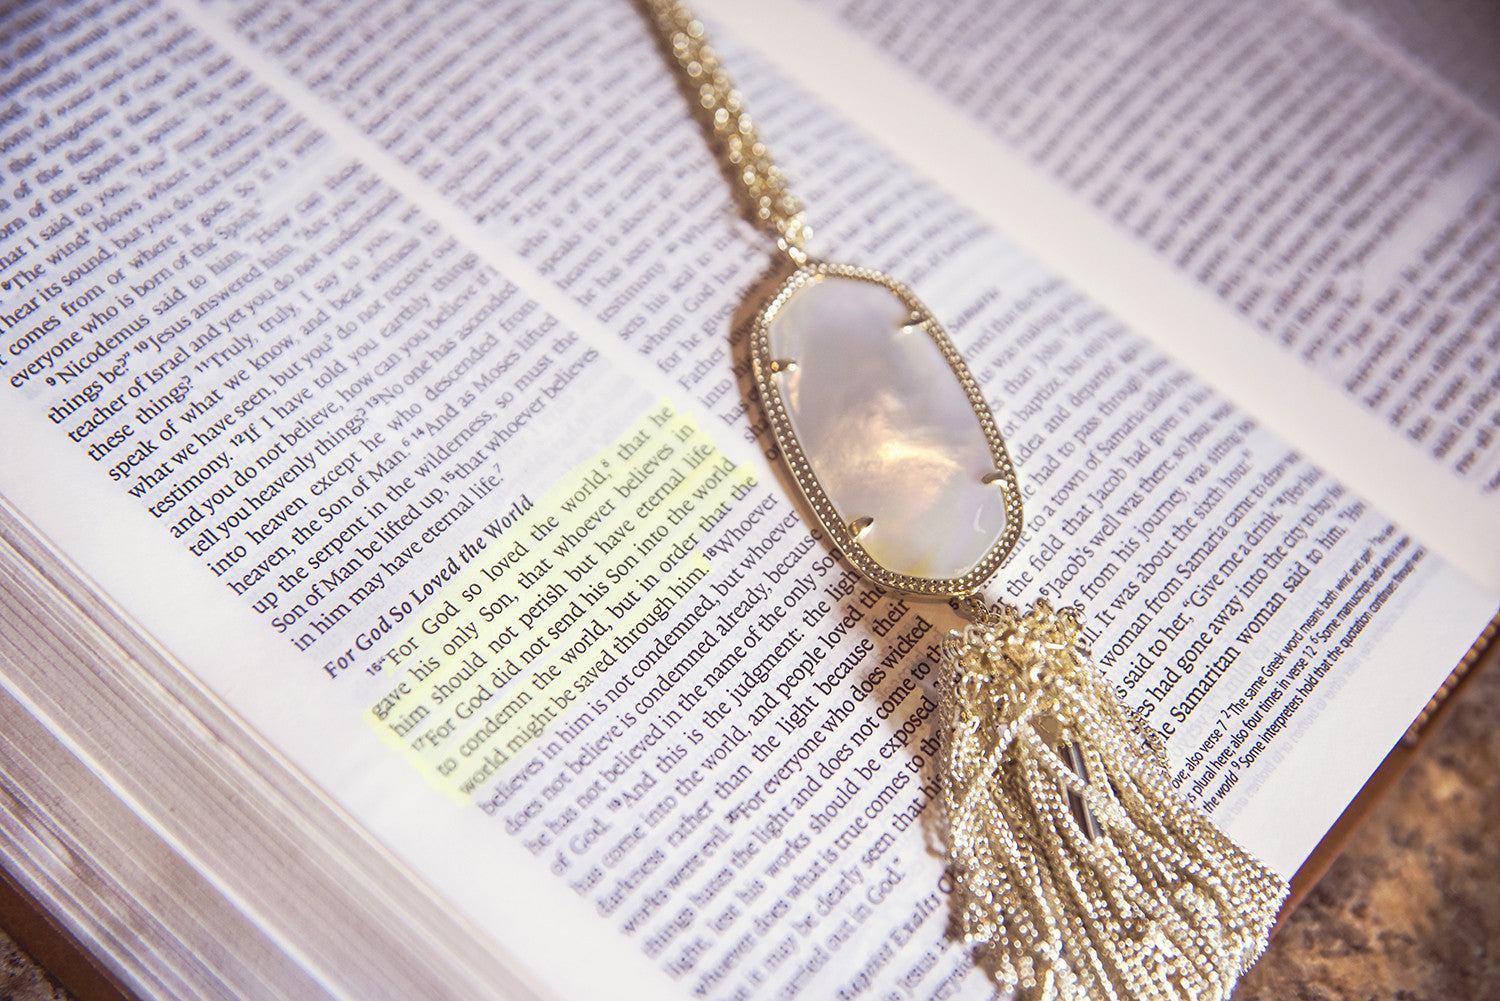 Kendra Scott Jewelry at Eccentrics Boutique. Kendra Scott necklace on Bible next to highlighted John 3:16.